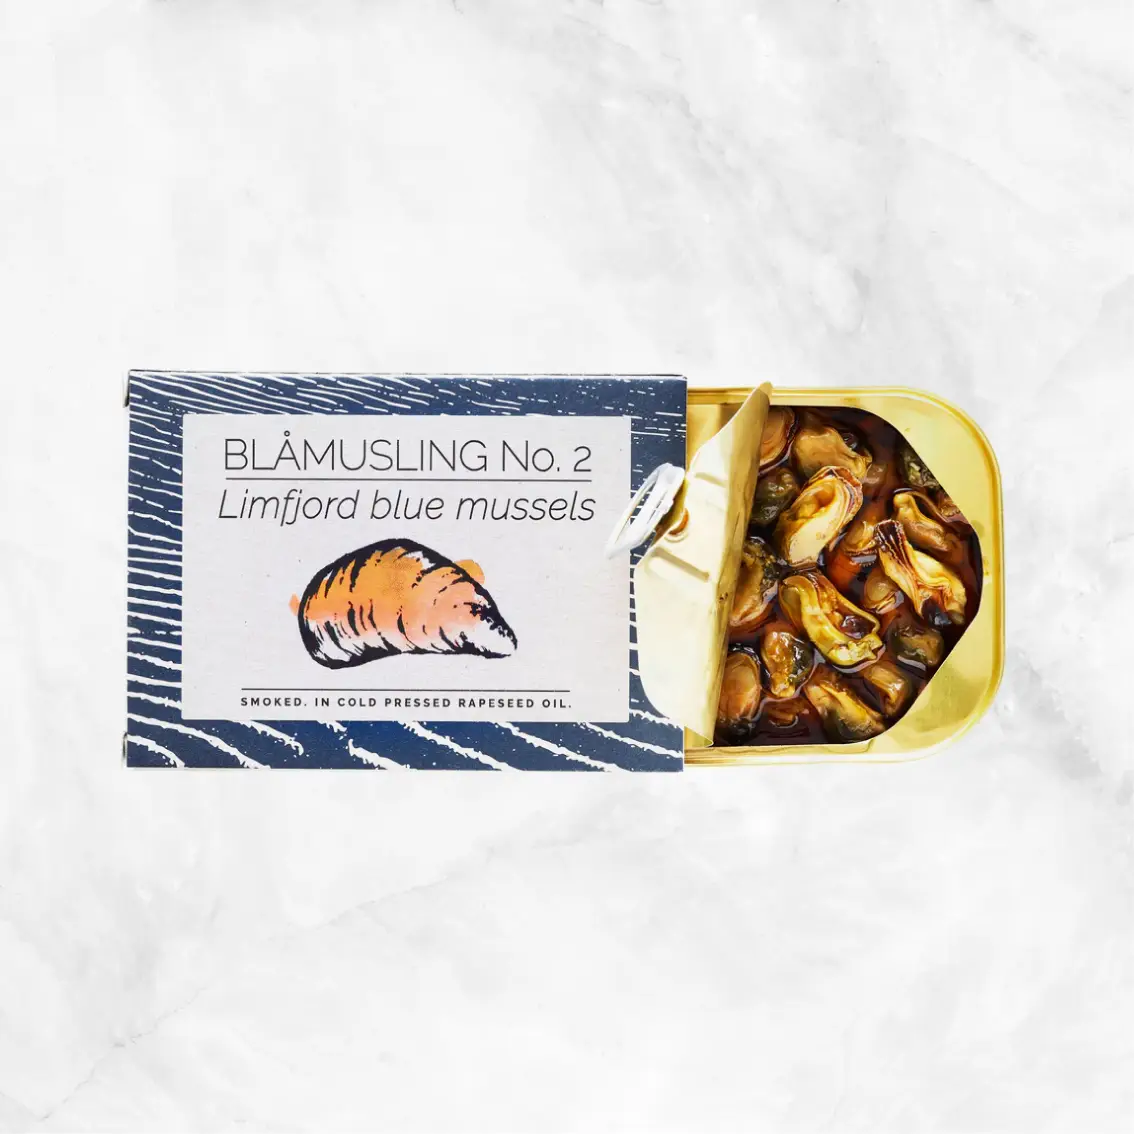 Blåmuslinger No. 2 Limfjord Blue Mussels Smoked in Cold Pressed Rapeseed Oil Delivery